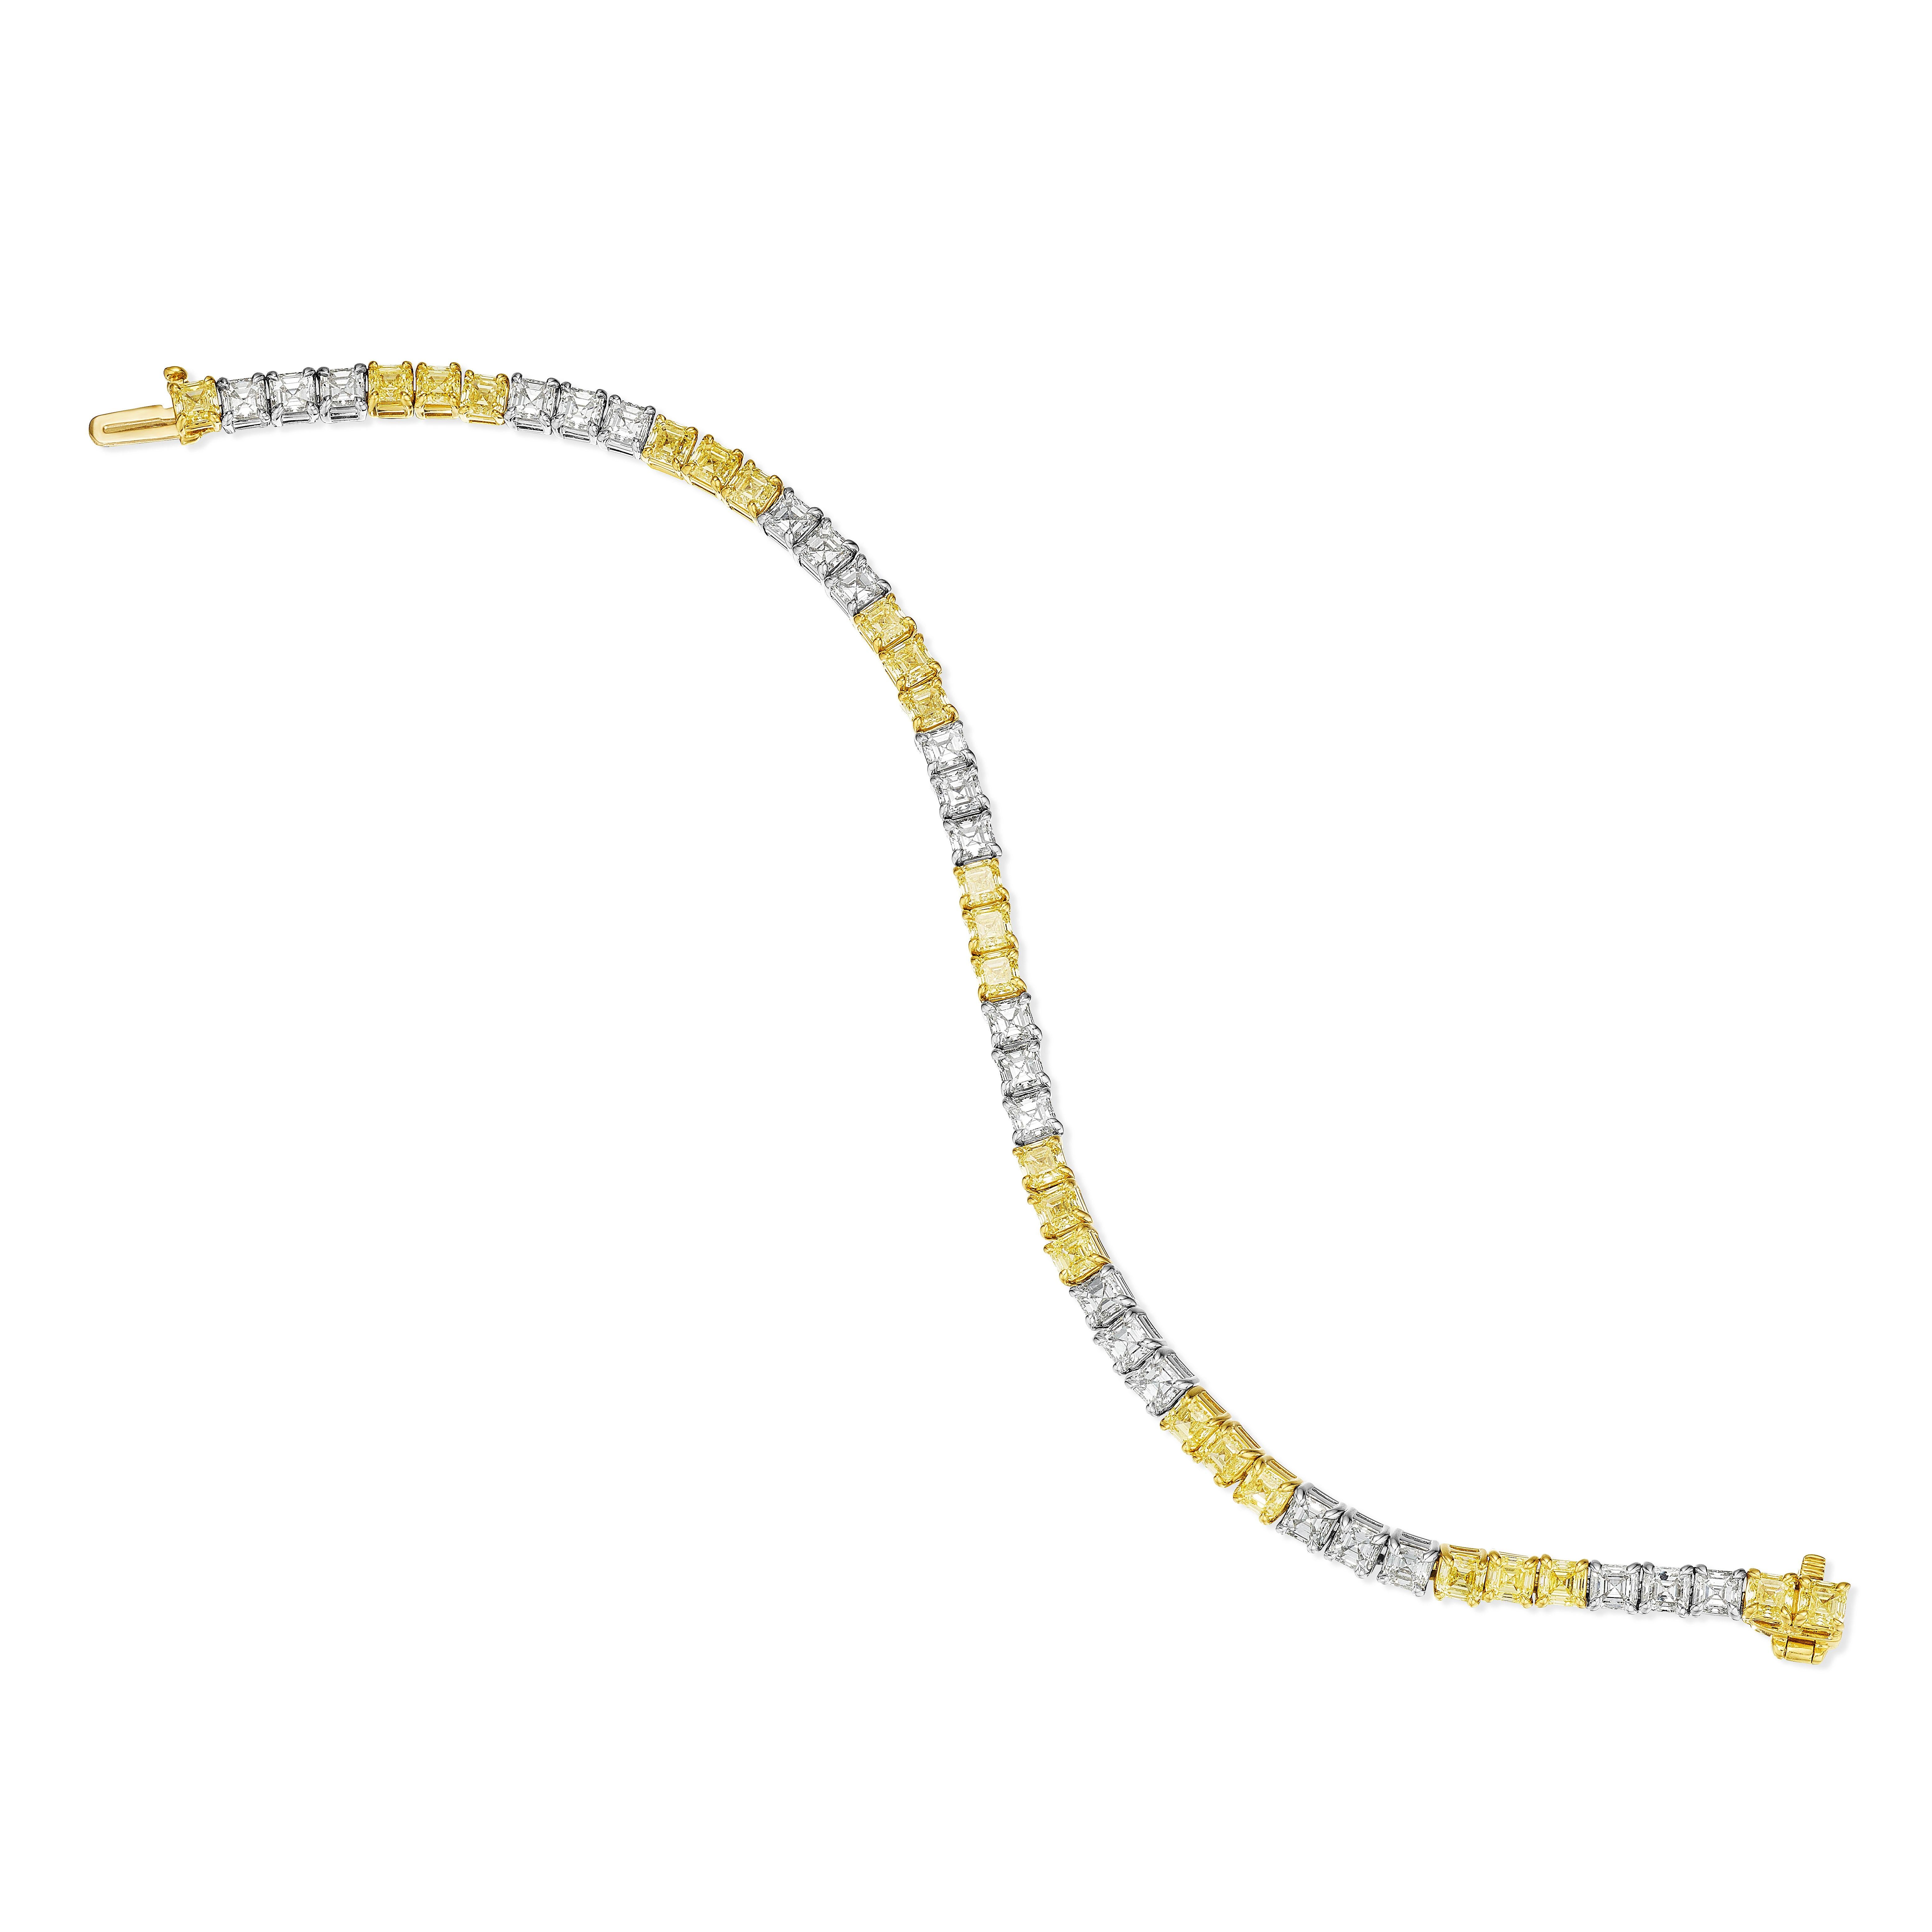 •	Platinum & 18KT Two Tone Gold
•	7” Long
•	10.06 Carats

•	Number of Fancy Yellow Diamonds: 24
•	Carat Weight: 5.56ctw

•	Number of White Diamonds: 24
•	Carat Weight: 4.50ctw

•	A reworked classic. This Platinum & 18KT Two toned tennis bracelet is